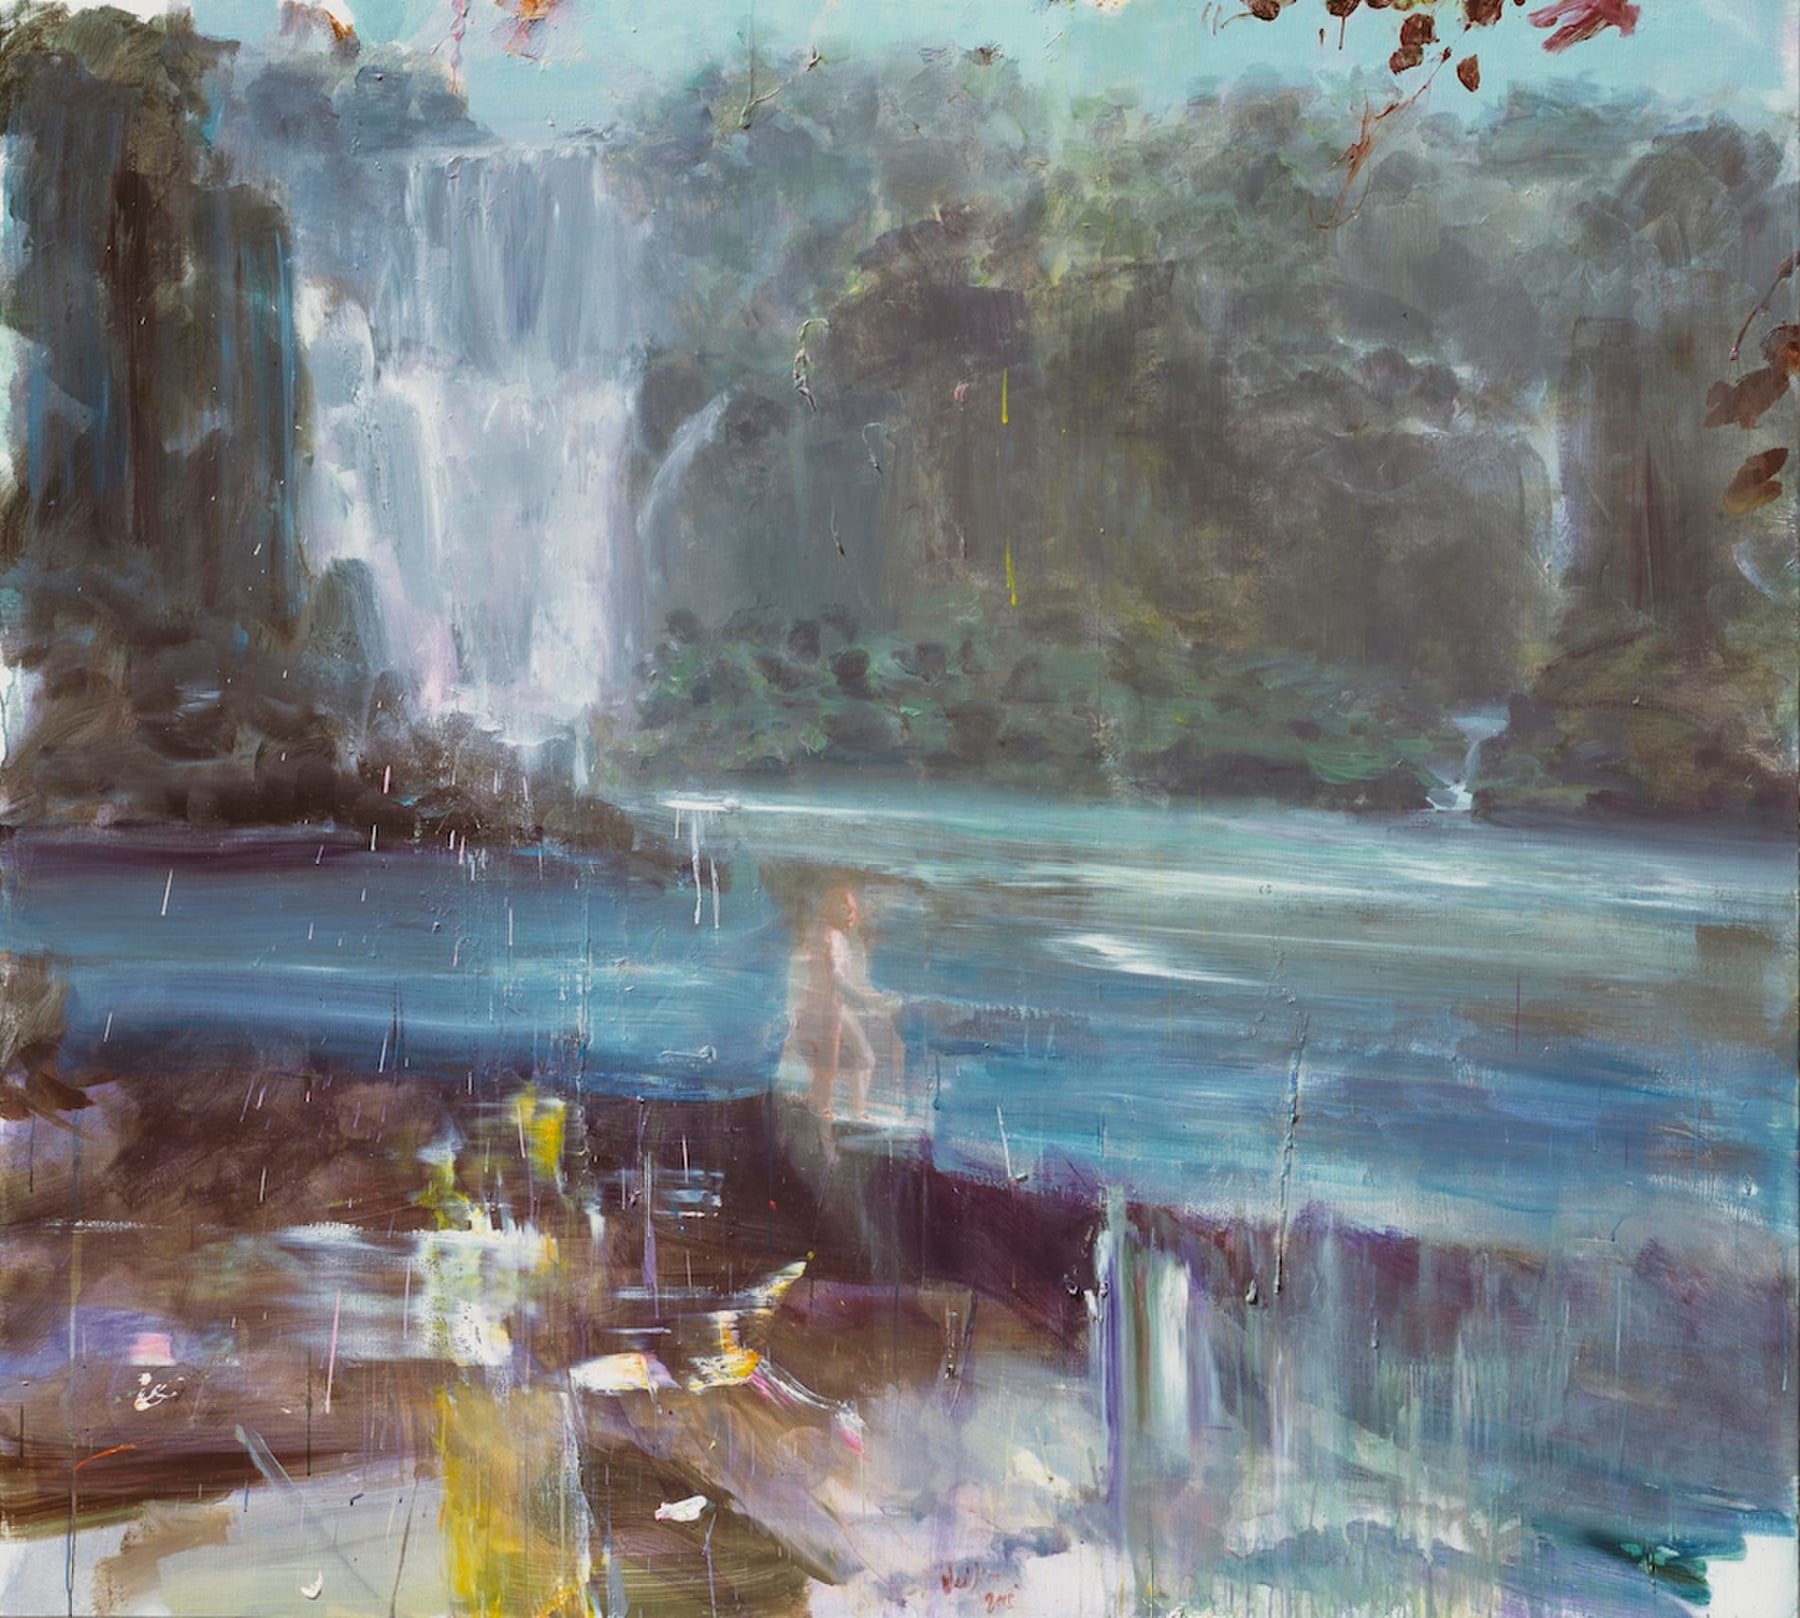 faded, dreamy landscape with a river and waterfall with a figure in the center